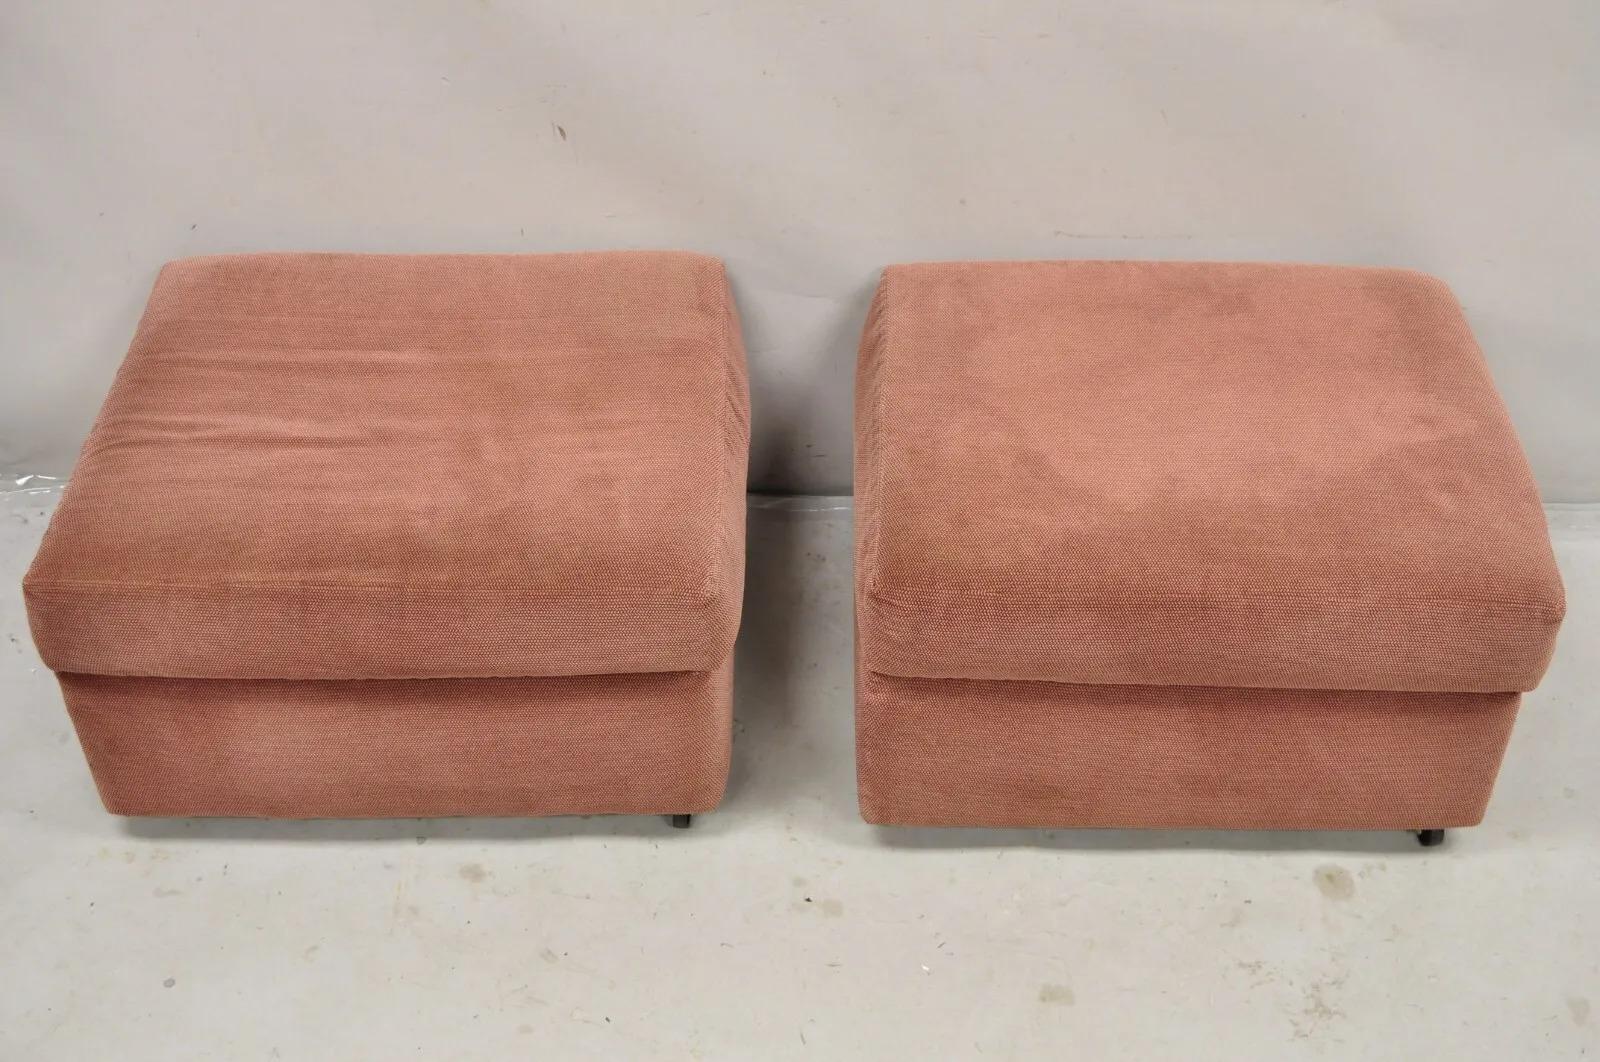 Thayer Coggin Modern Upholstered Mauve Color Ottomans on Wheels - a Pair. Circa Late 20th Century. Measurements: 16